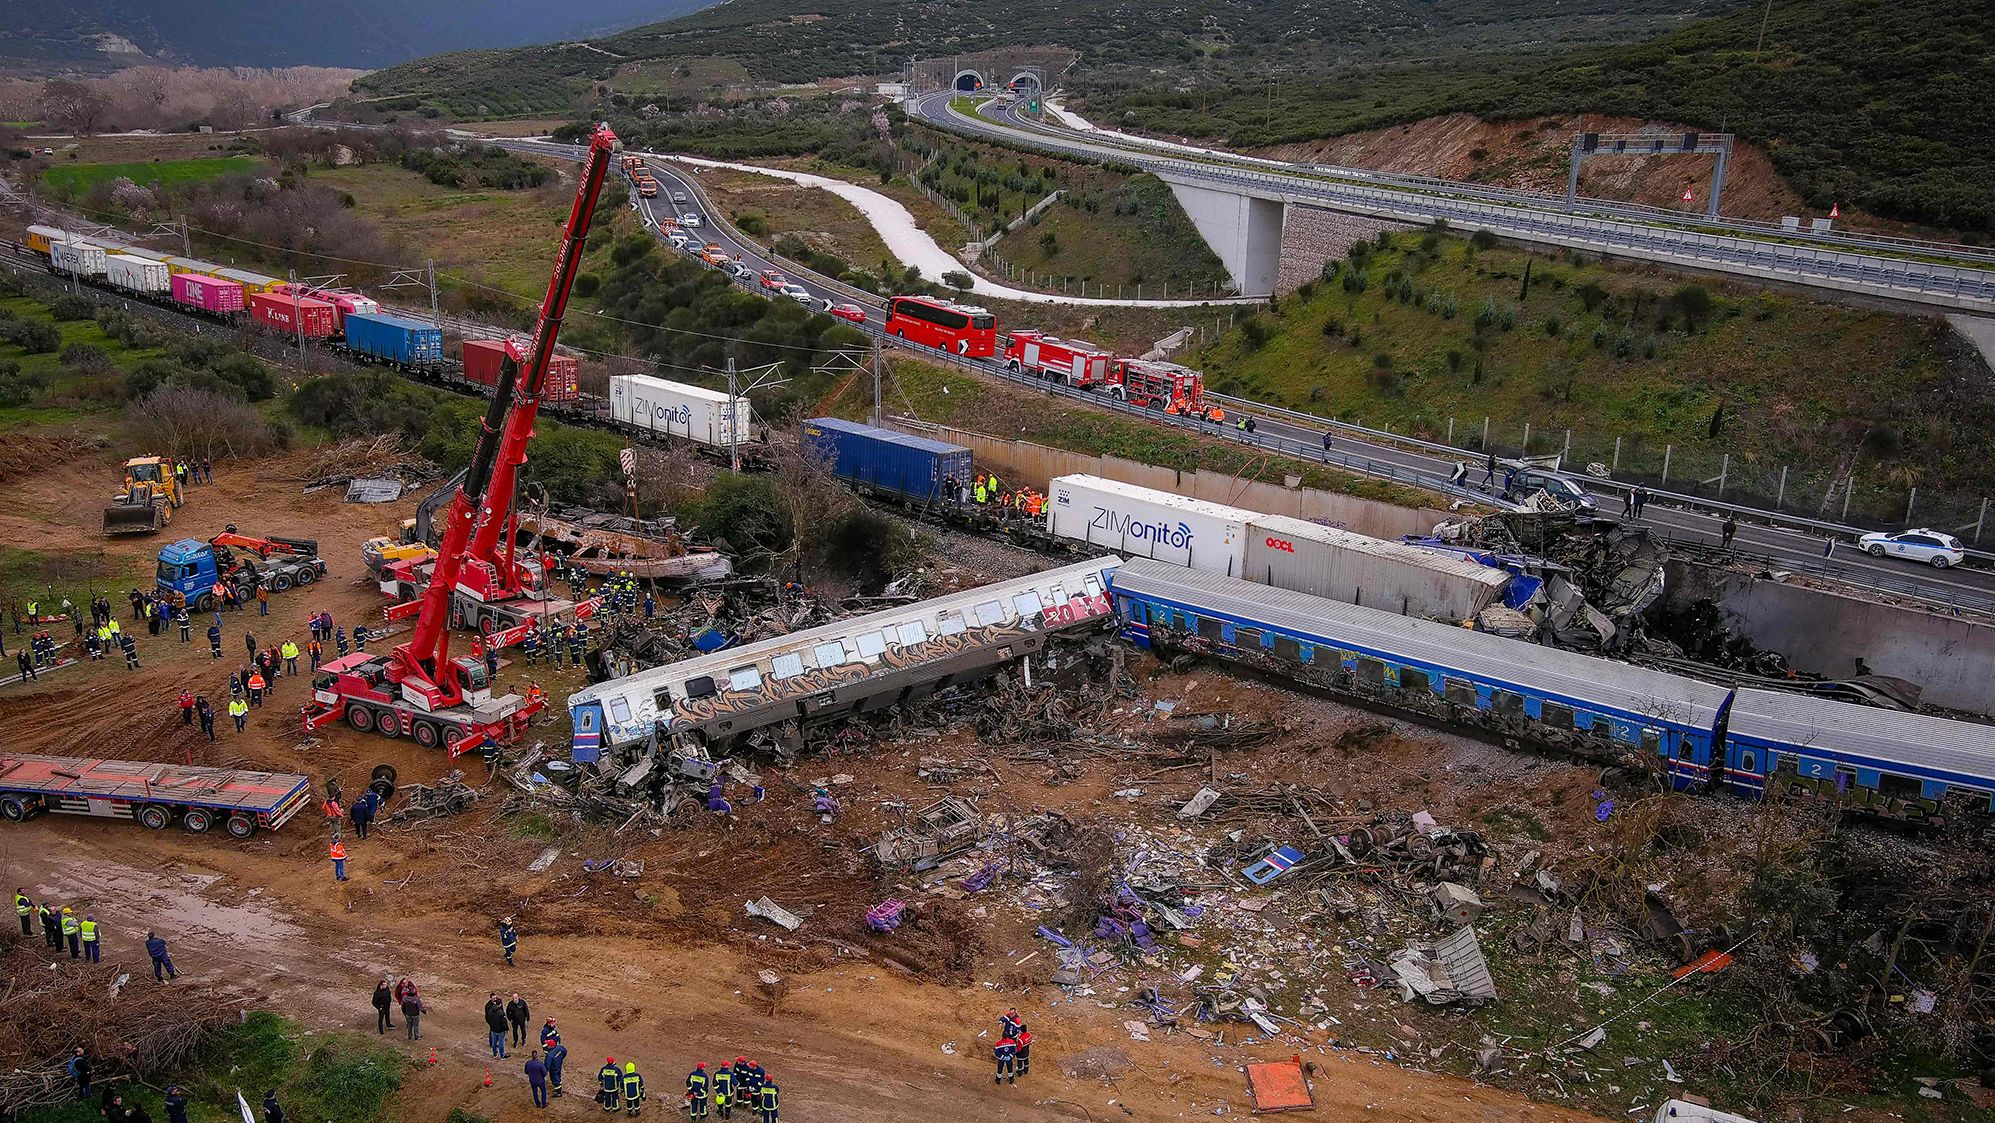 Greek rail inspector detained over train disaster: court official